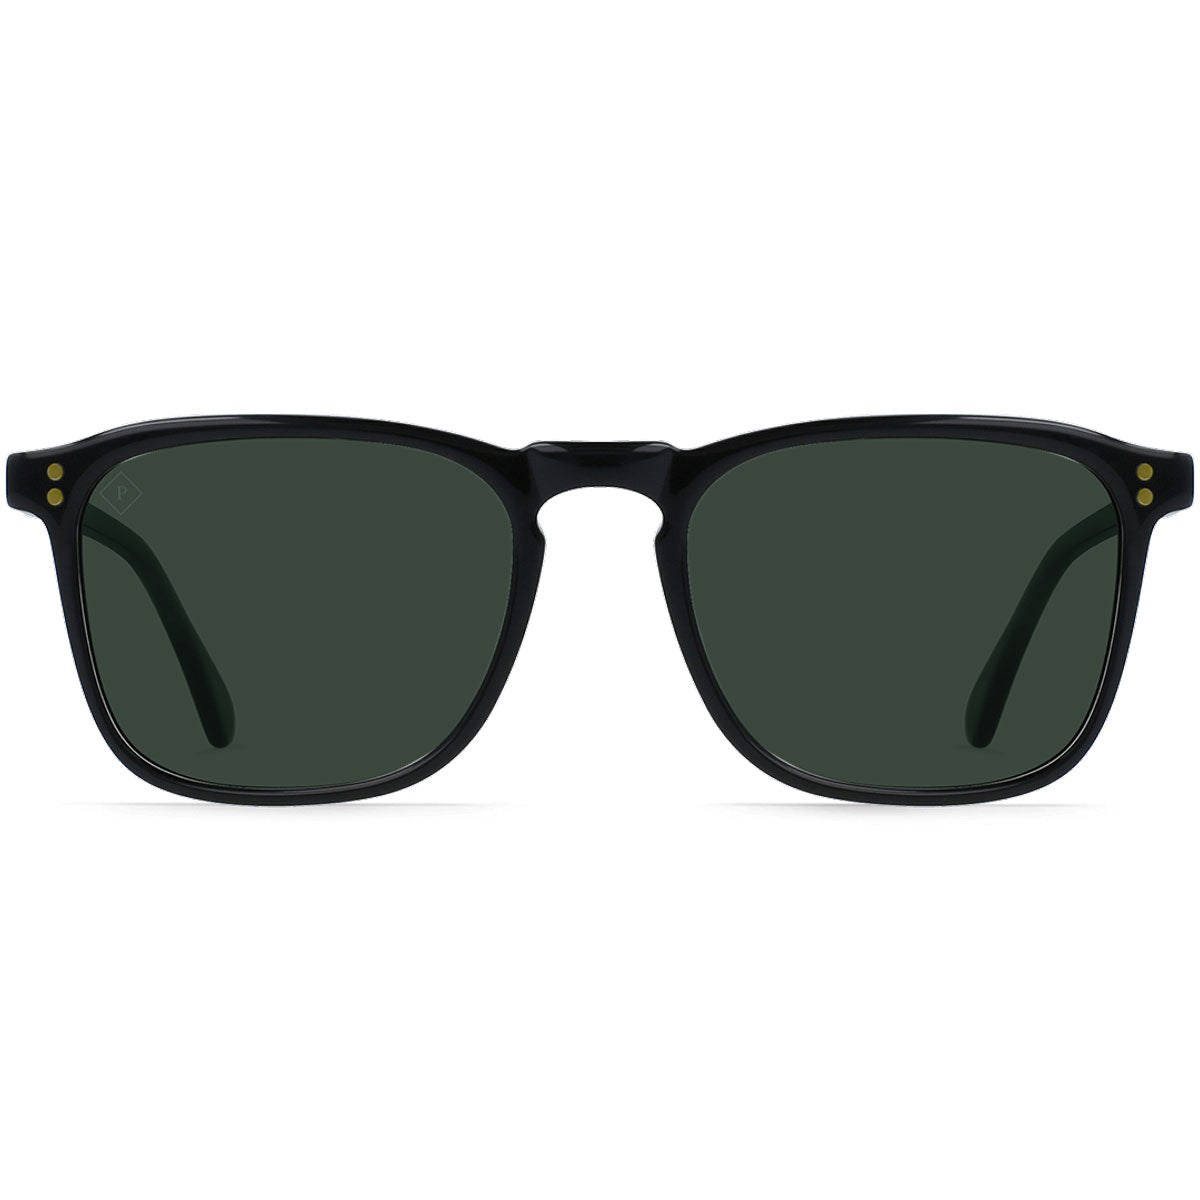 Raen Wiley 54 Sunglasses - Recycled Black/Green Polarized image 4